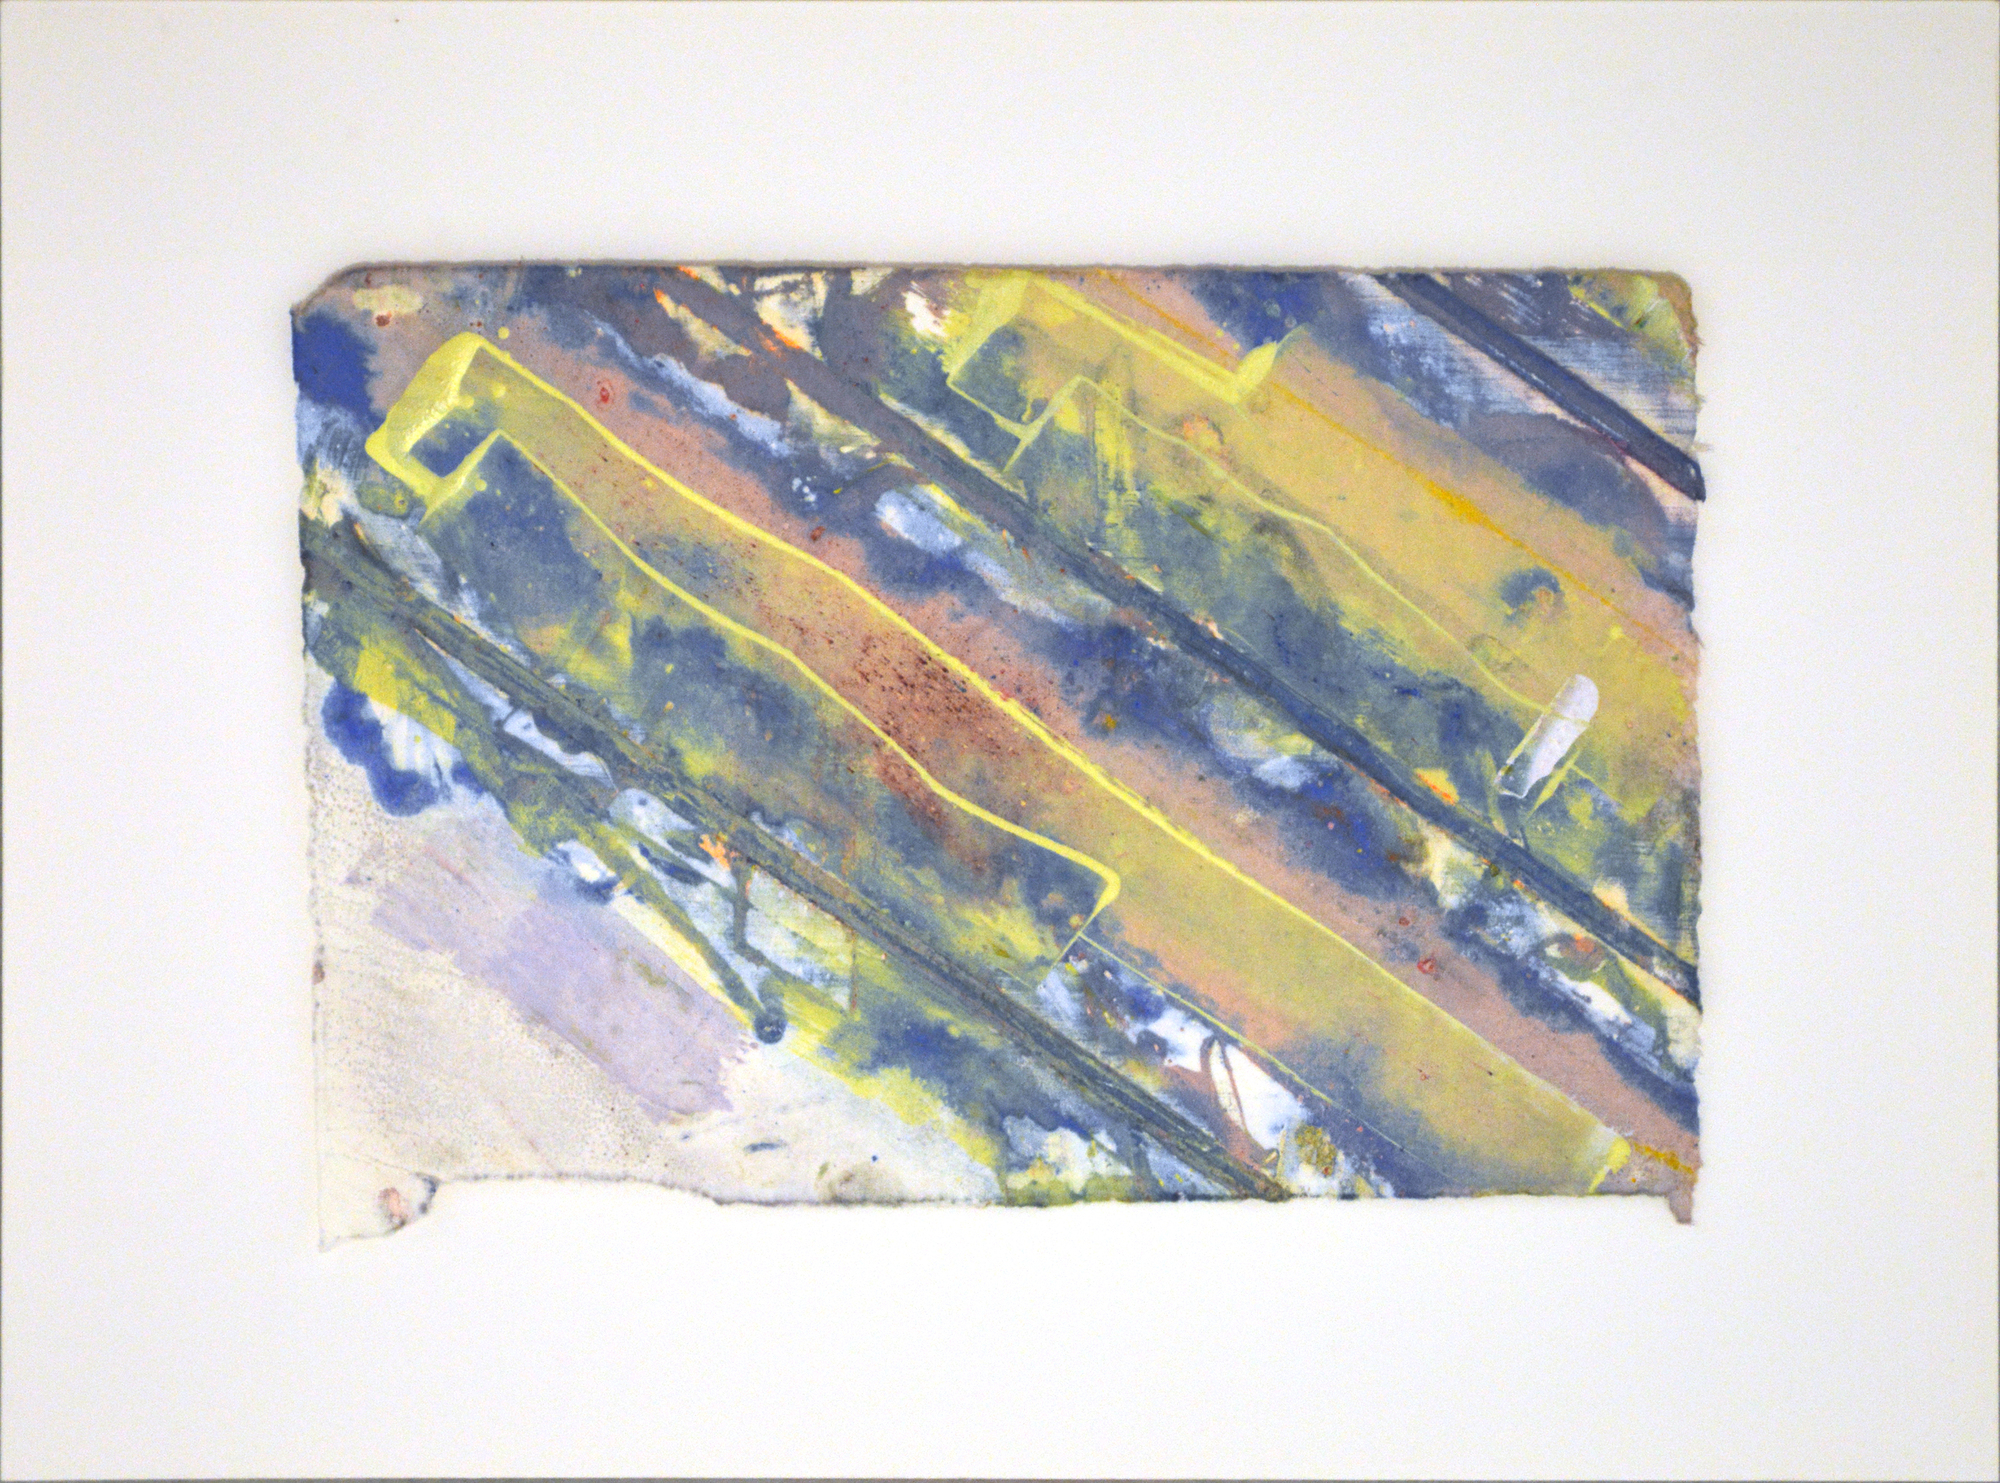 KENNETH NOLAND - Stripes - monotype on Japanese handmade paper mounted on board - 8 1/2 x 12 1/2 in.